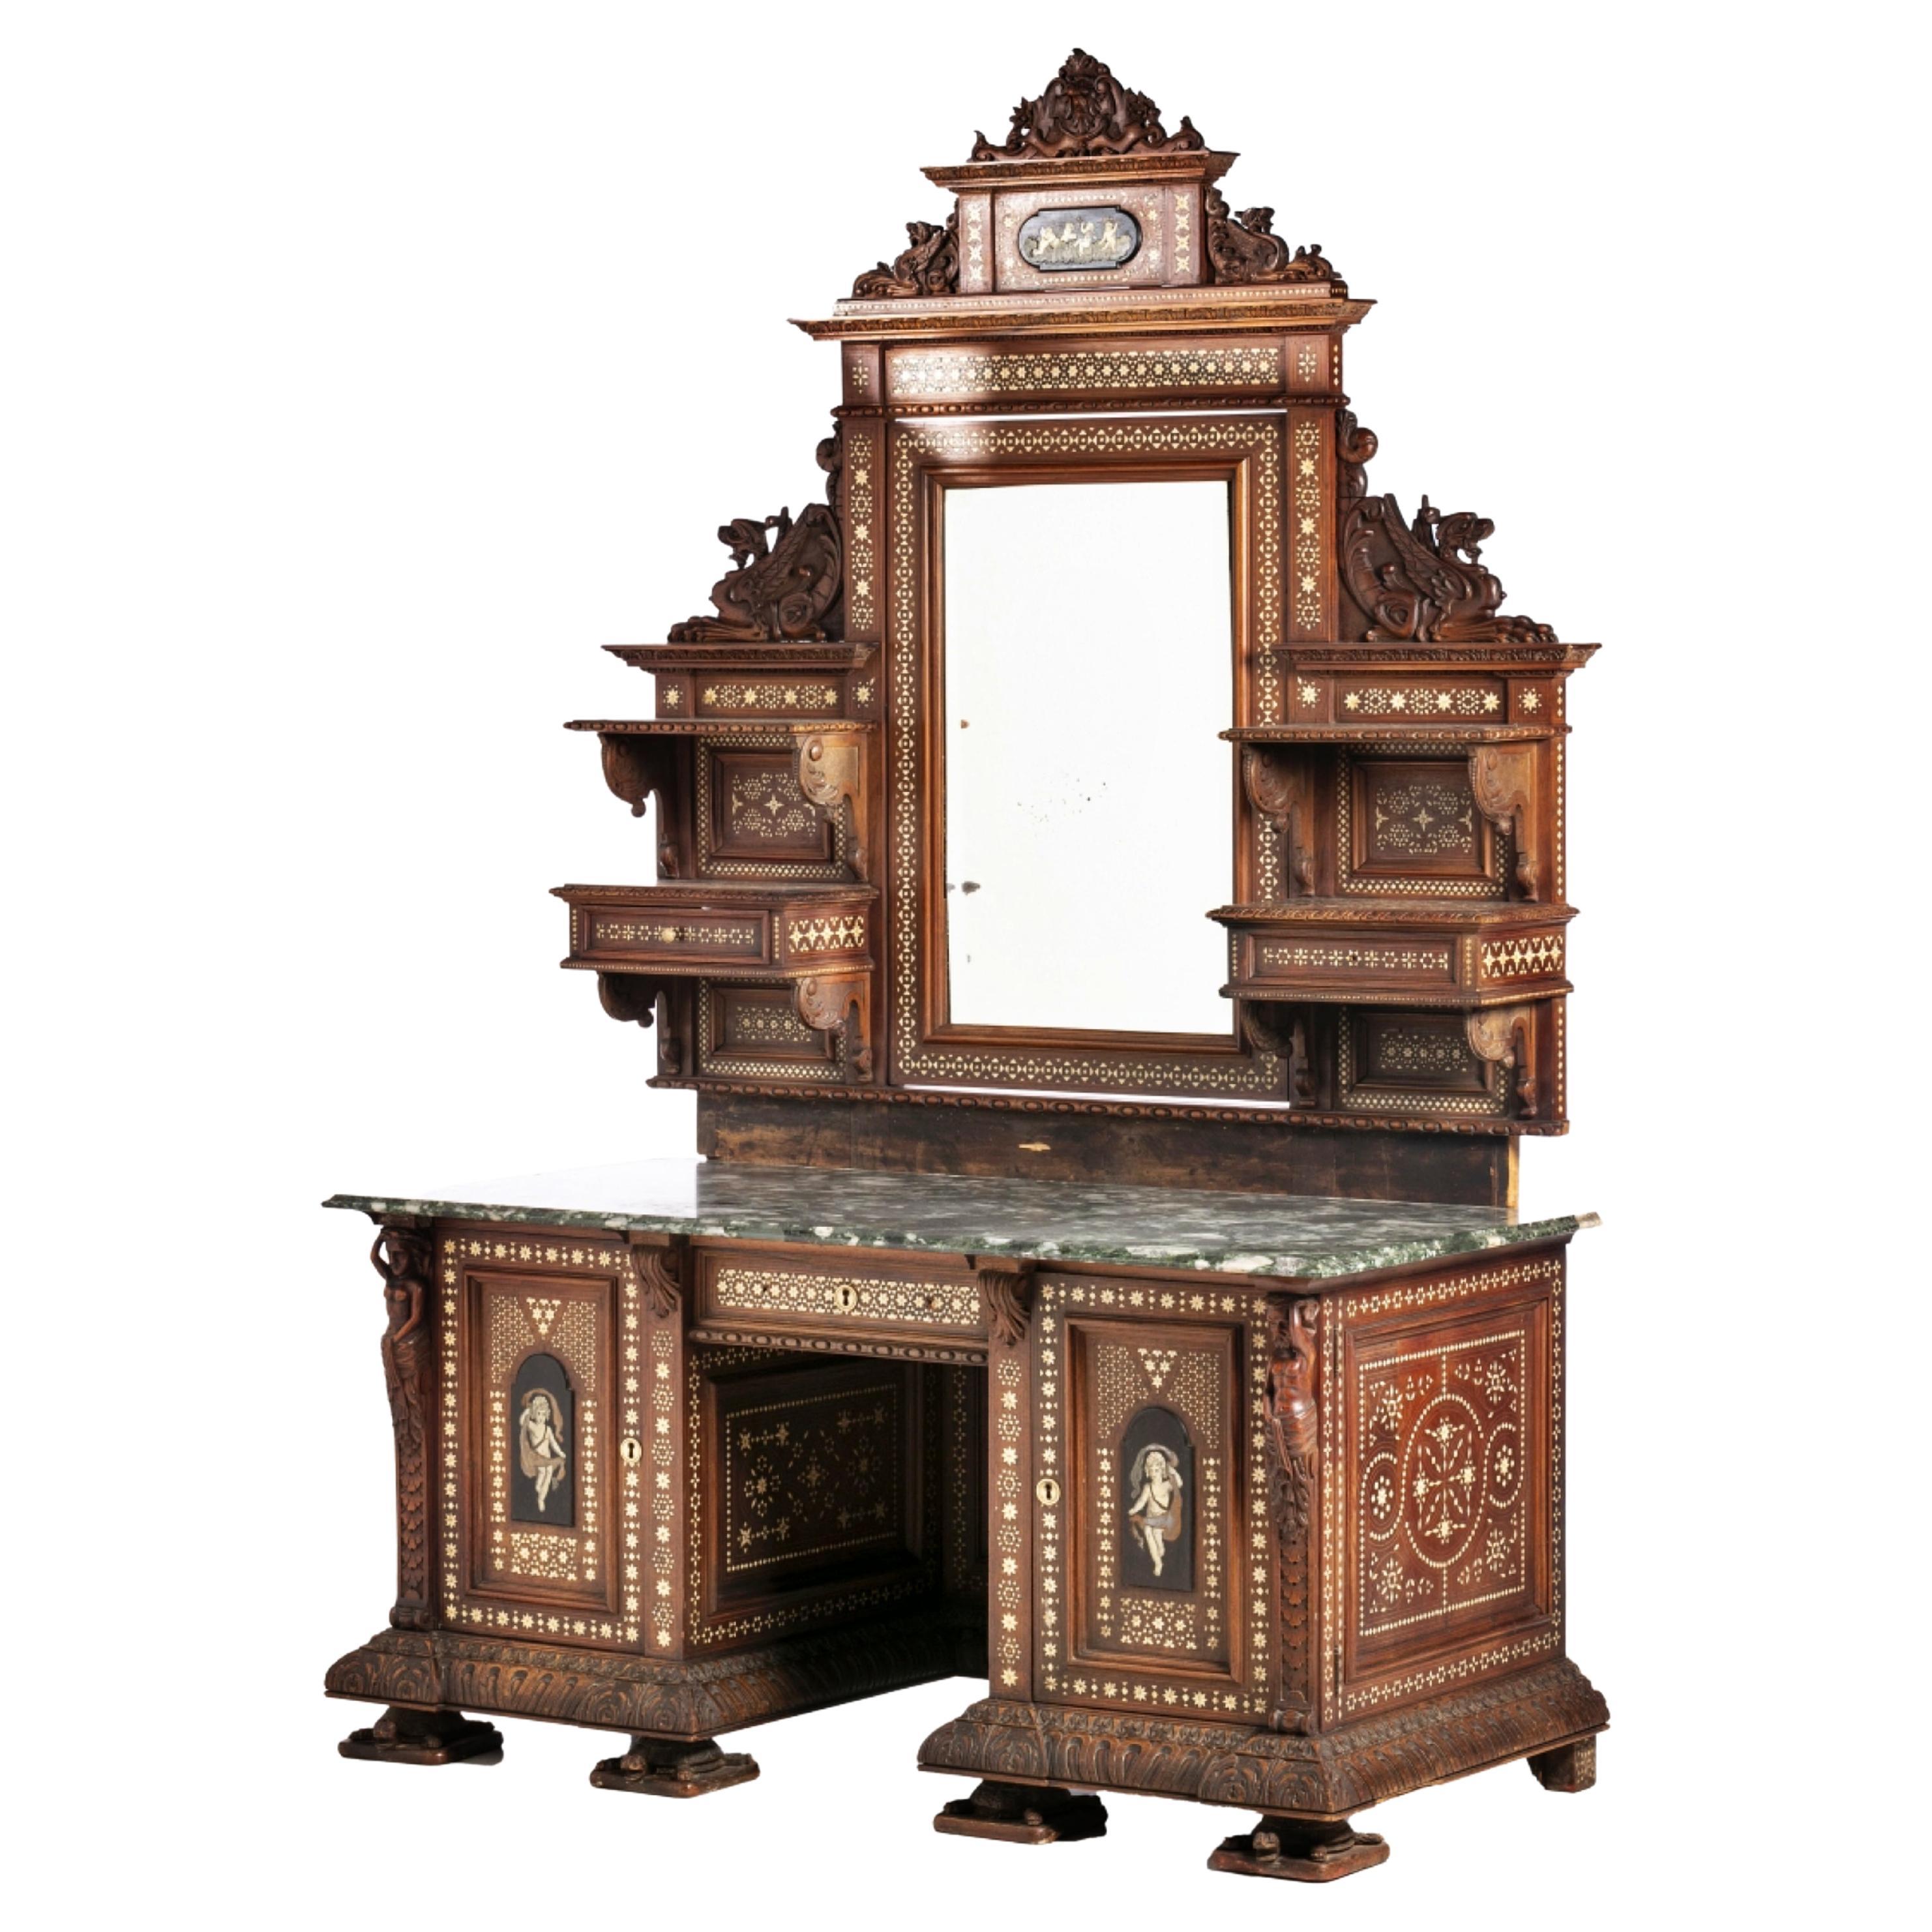 RARE AND SPECTACULAR 19th Century ITALIAN DRESSING FURNITURE For Sale